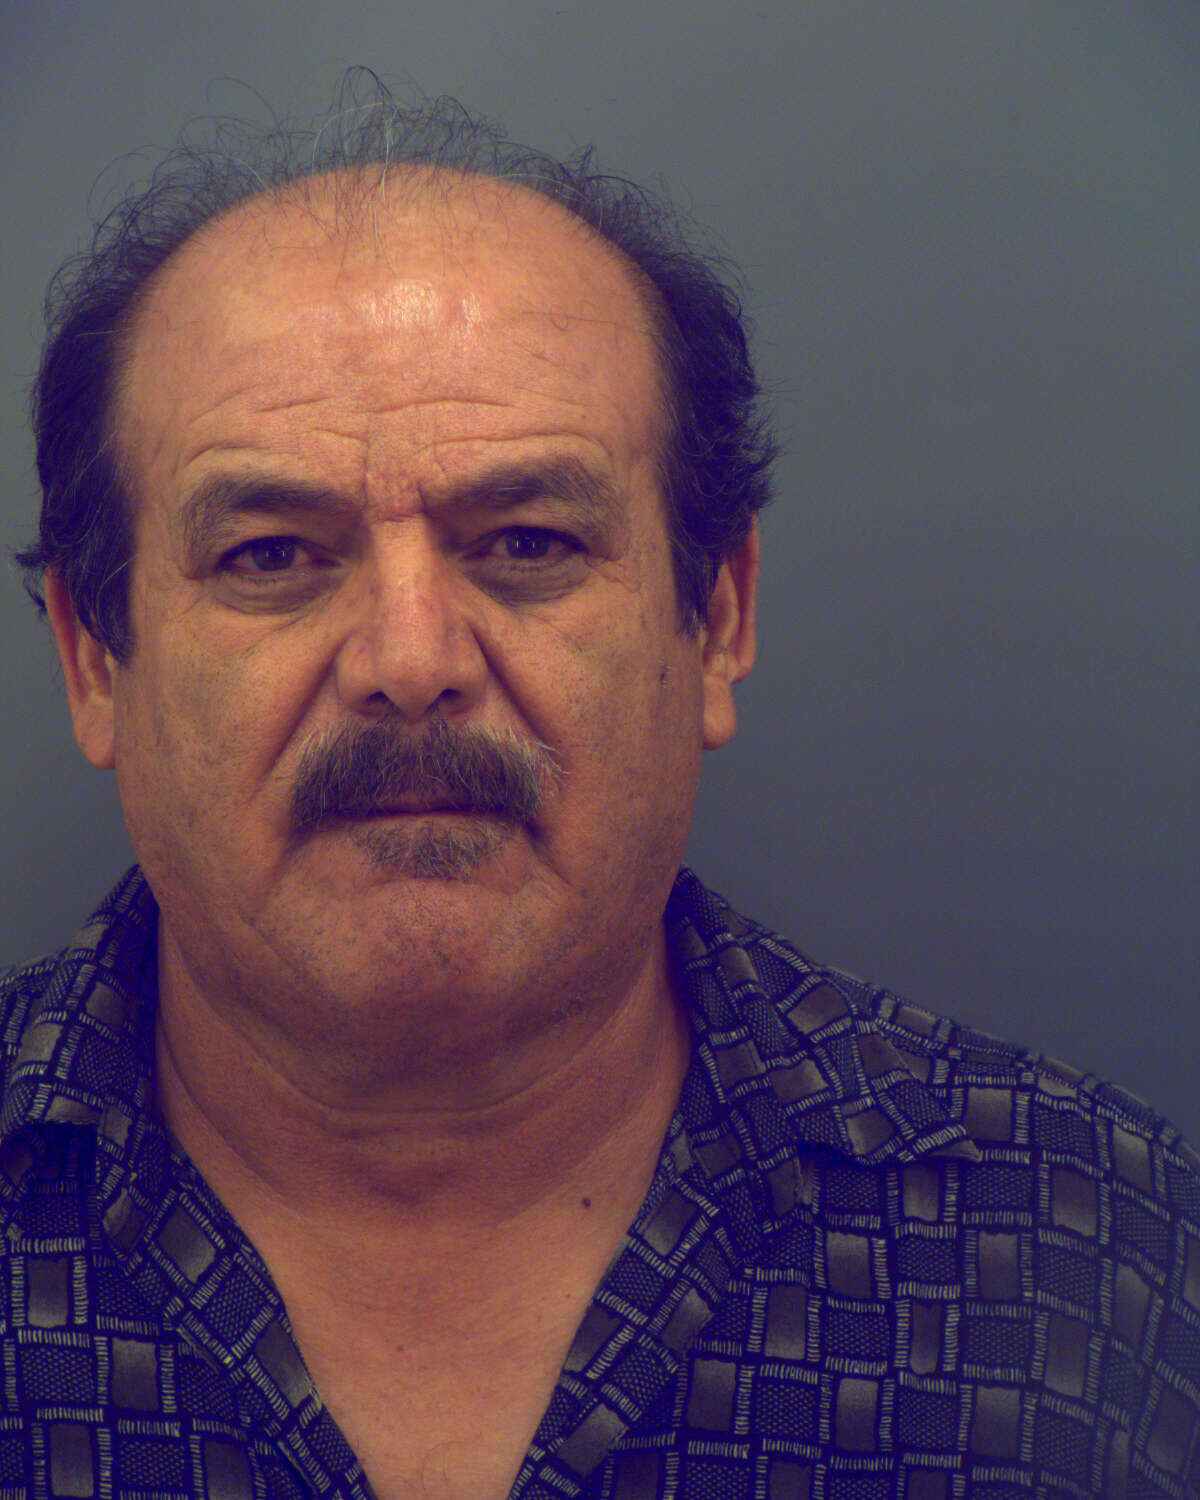 Efren Saenz, 60, was arrested and charged with driving while intoxicated, a third-degree felony, and was booked into El Paso County Jail on a $3,500 bond July 24. 